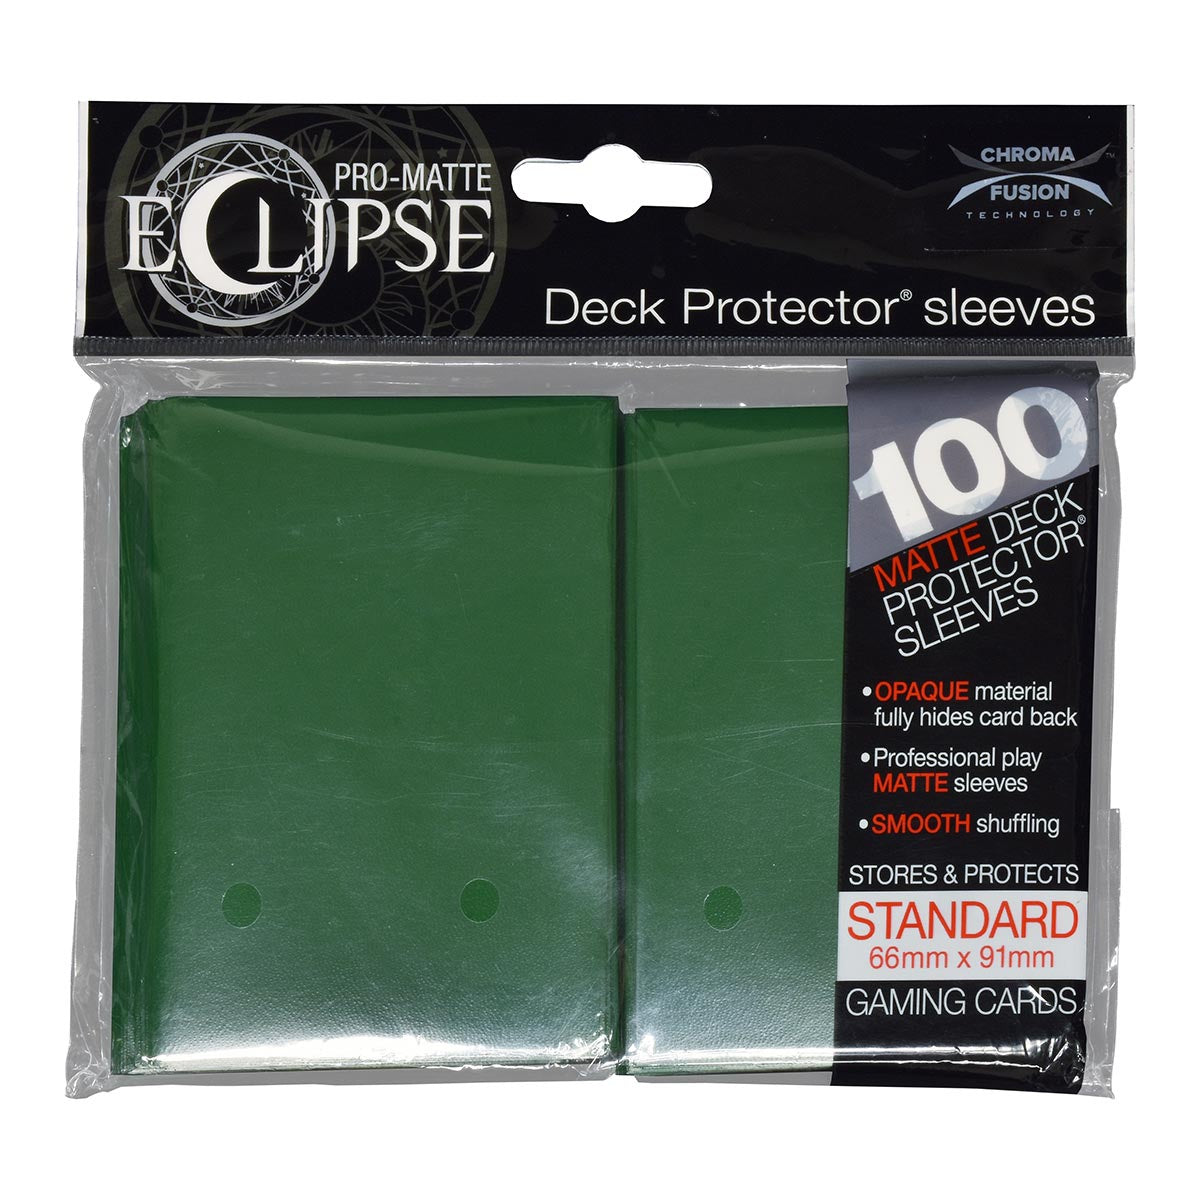 ULTRA PRO PRO-MATTE DECK PROTECTOR SLEEVES 100 PACK - FOREST GREEN